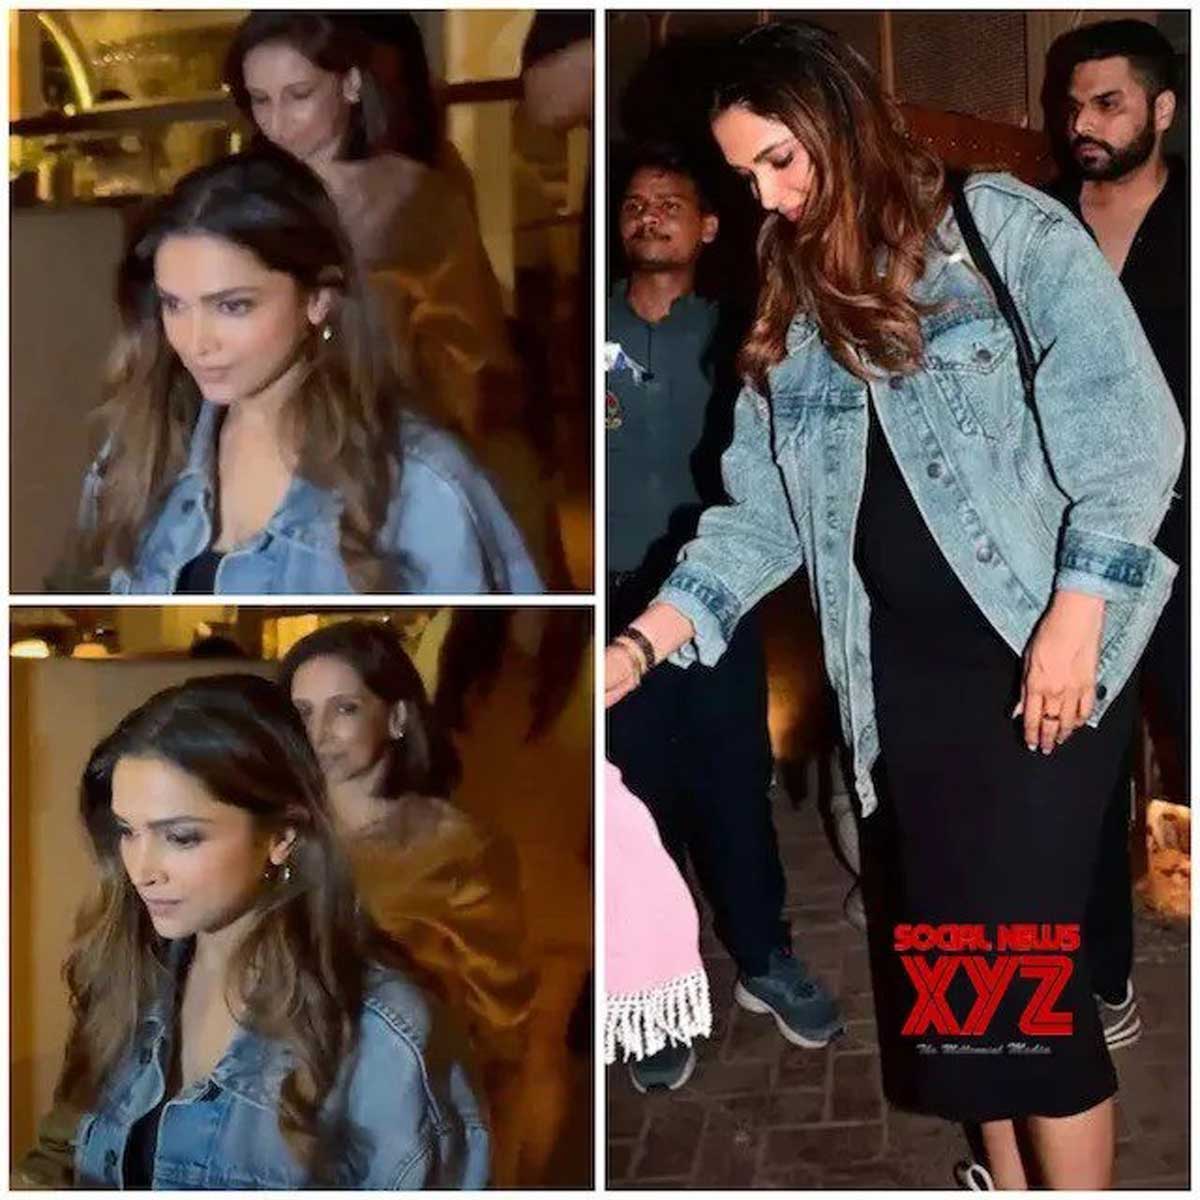 Deepika Padukone was seen out with family during her pregnancy